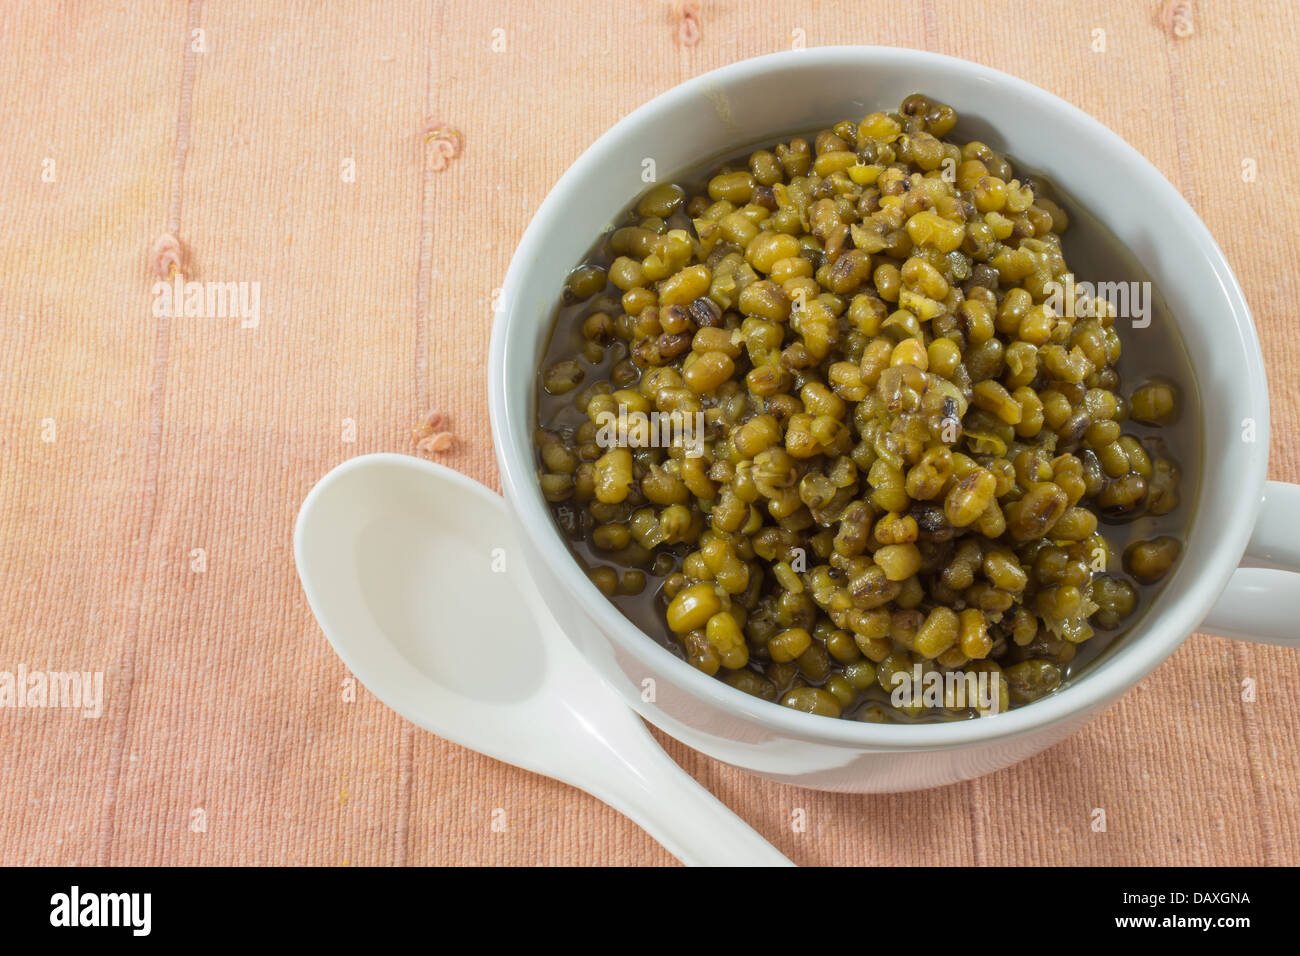 Mungbeans in light syrup or Green bean in syrup in a cup Deserts of Thailand Stock Photo